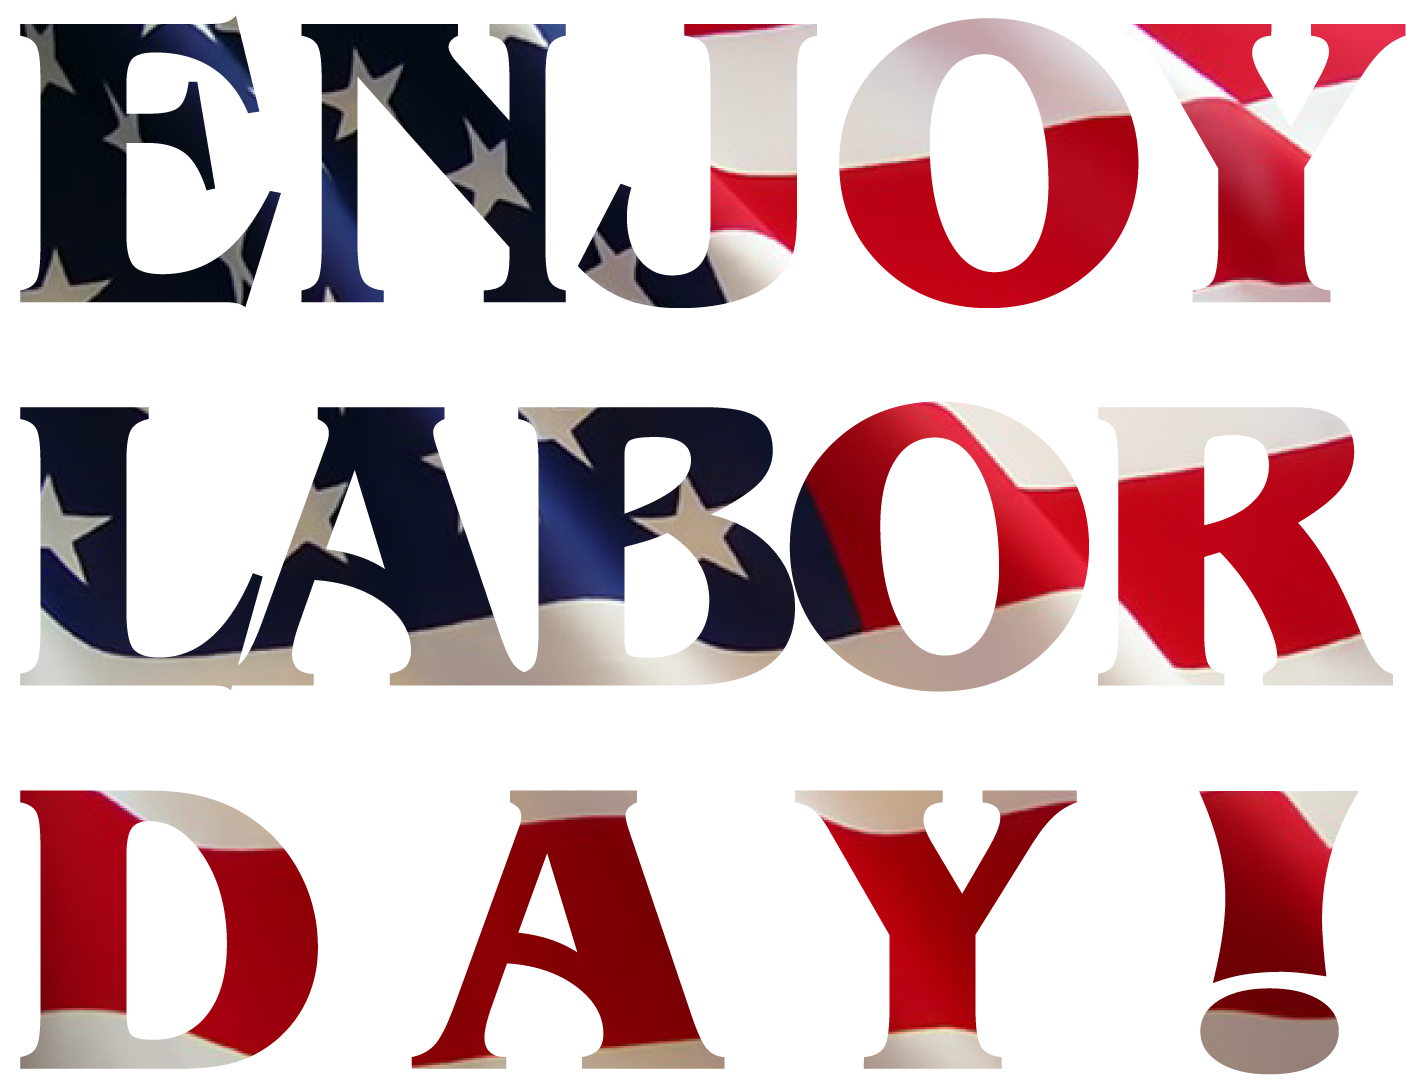 Clipart happy labor day. Fancy dress competition ideas